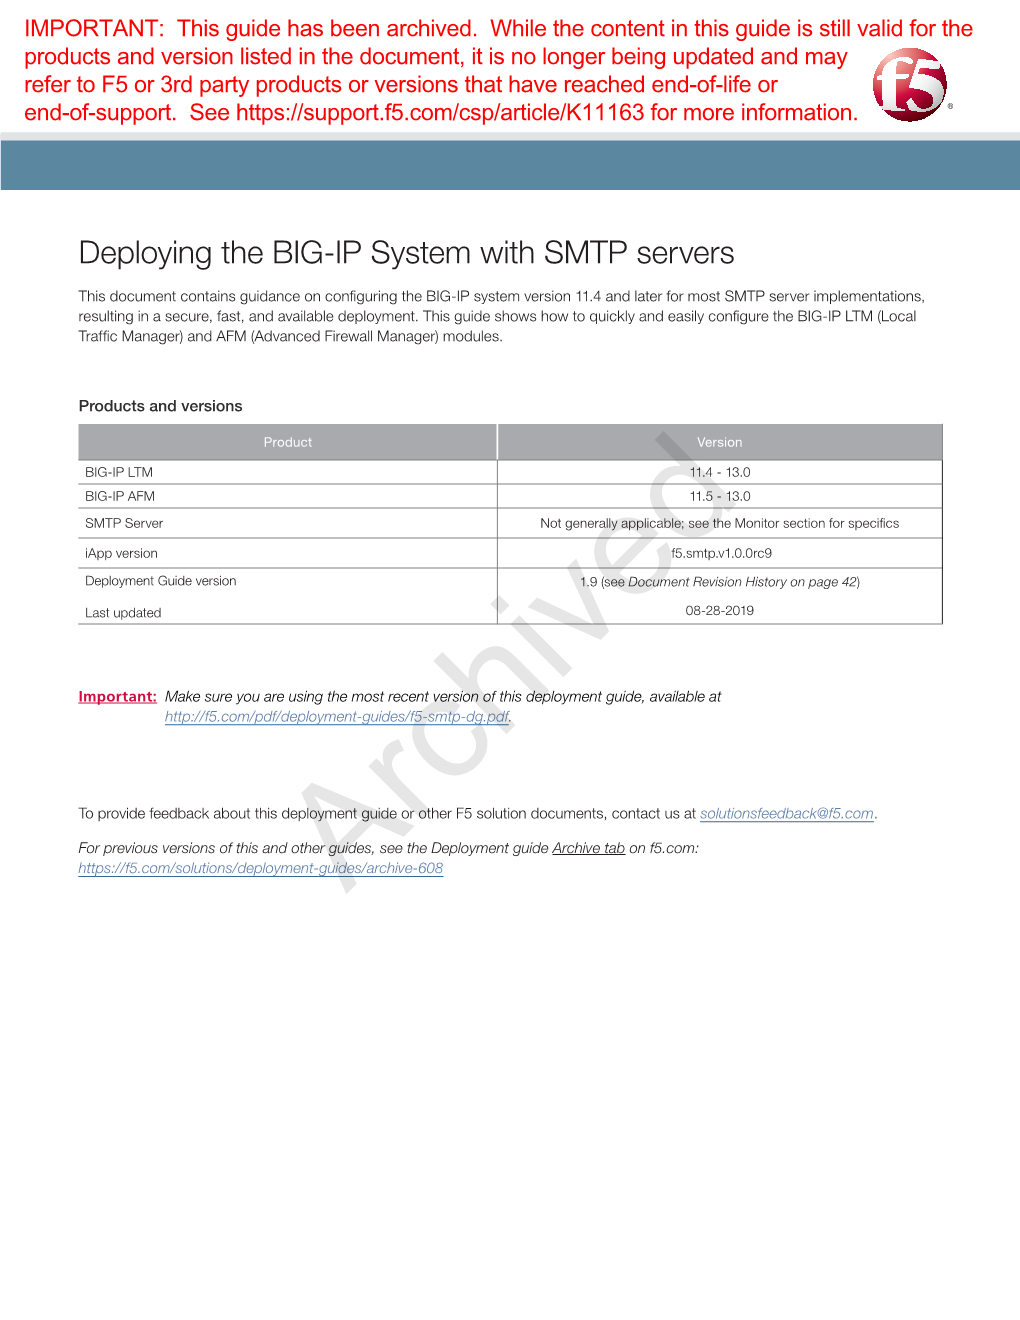 Deploying the BIG-IP System with SMTP Servers